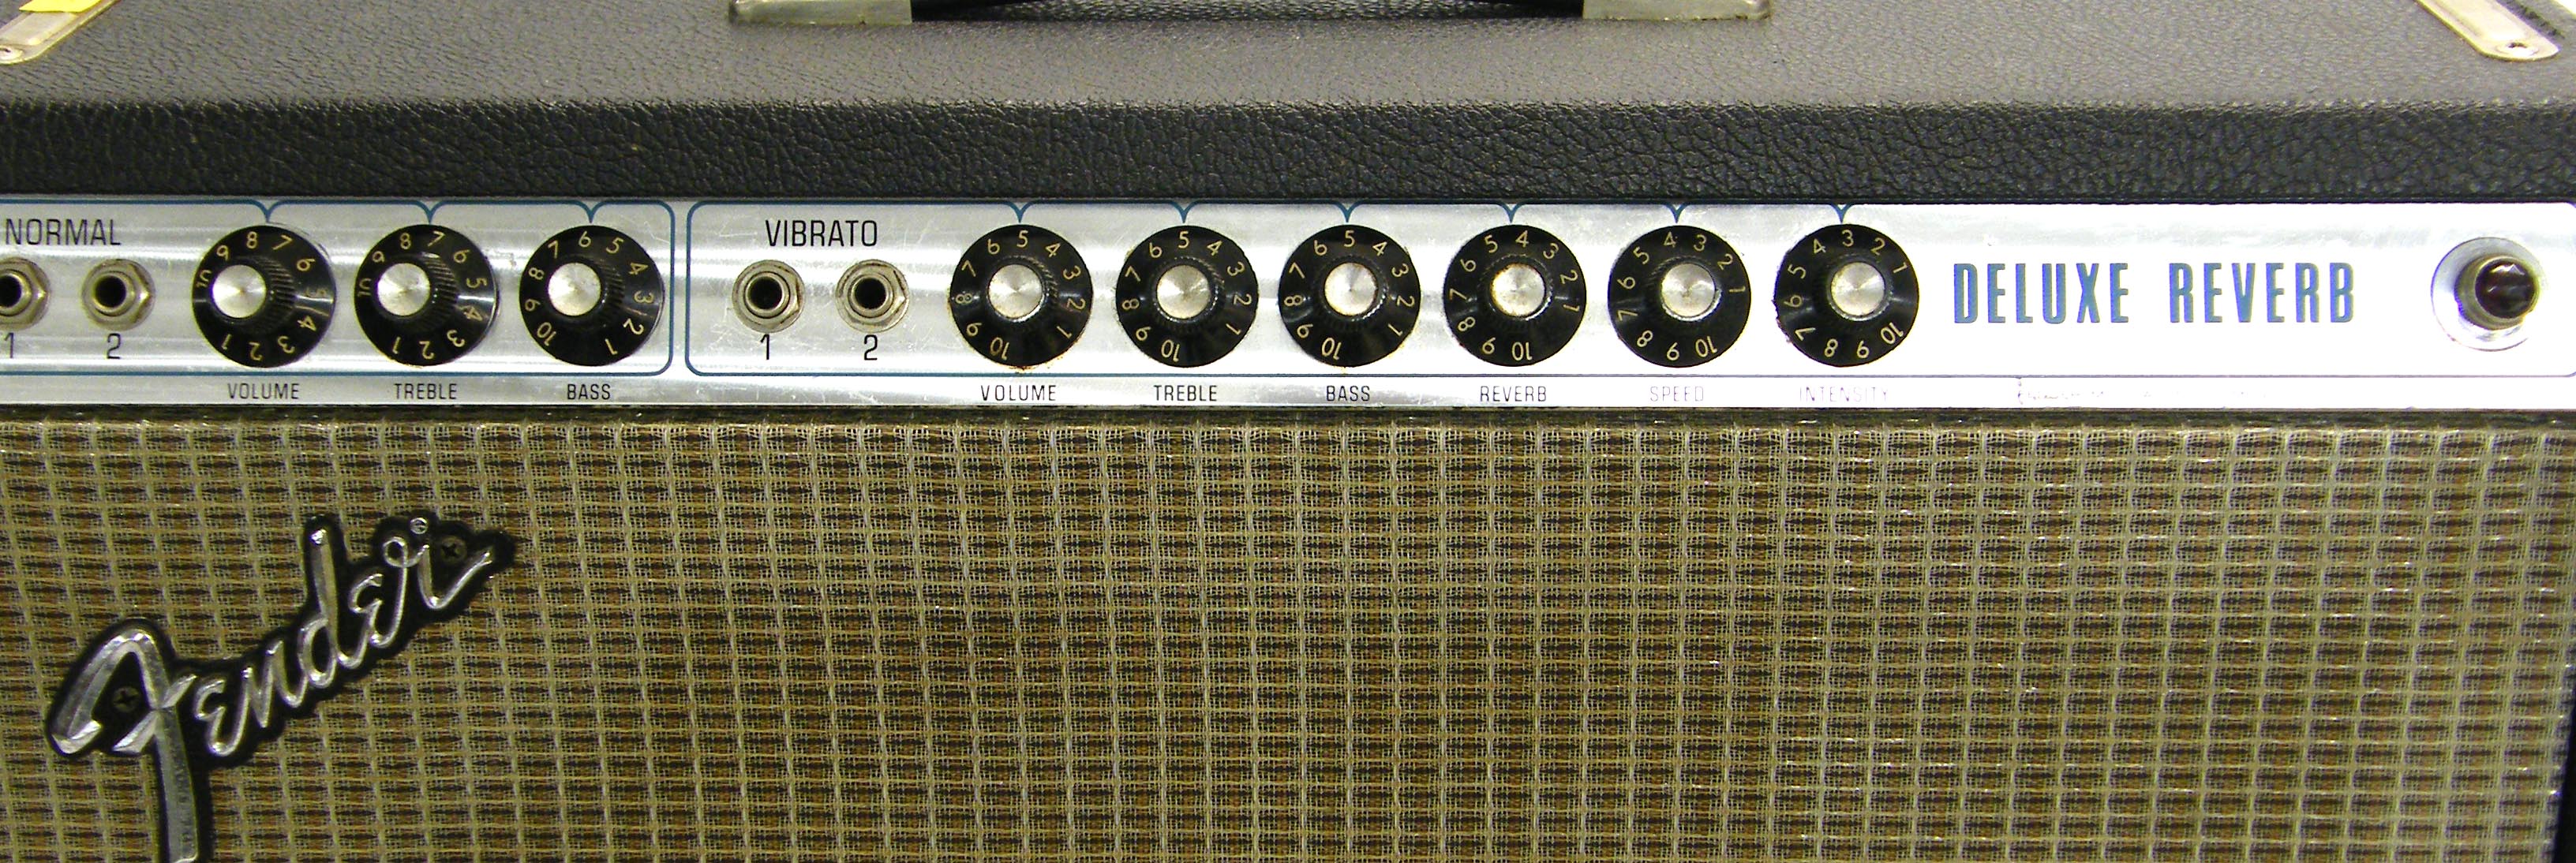 1977 Fender Deluxe Reverb guitar amplifier, ser. no. A742520, appears to be functioning - Image 2 of 2